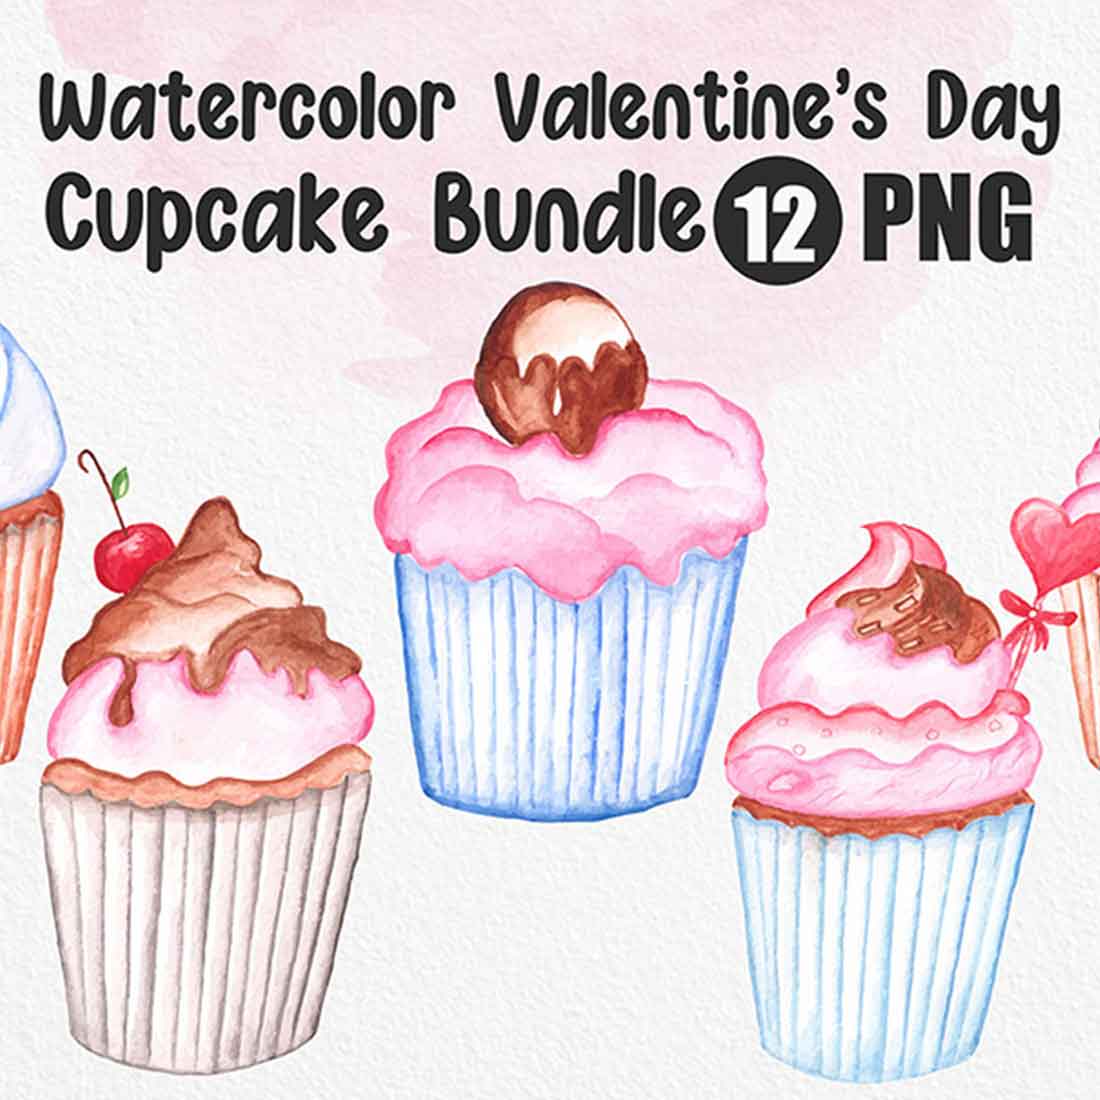 Collection of cute watercolor images of cupcakes